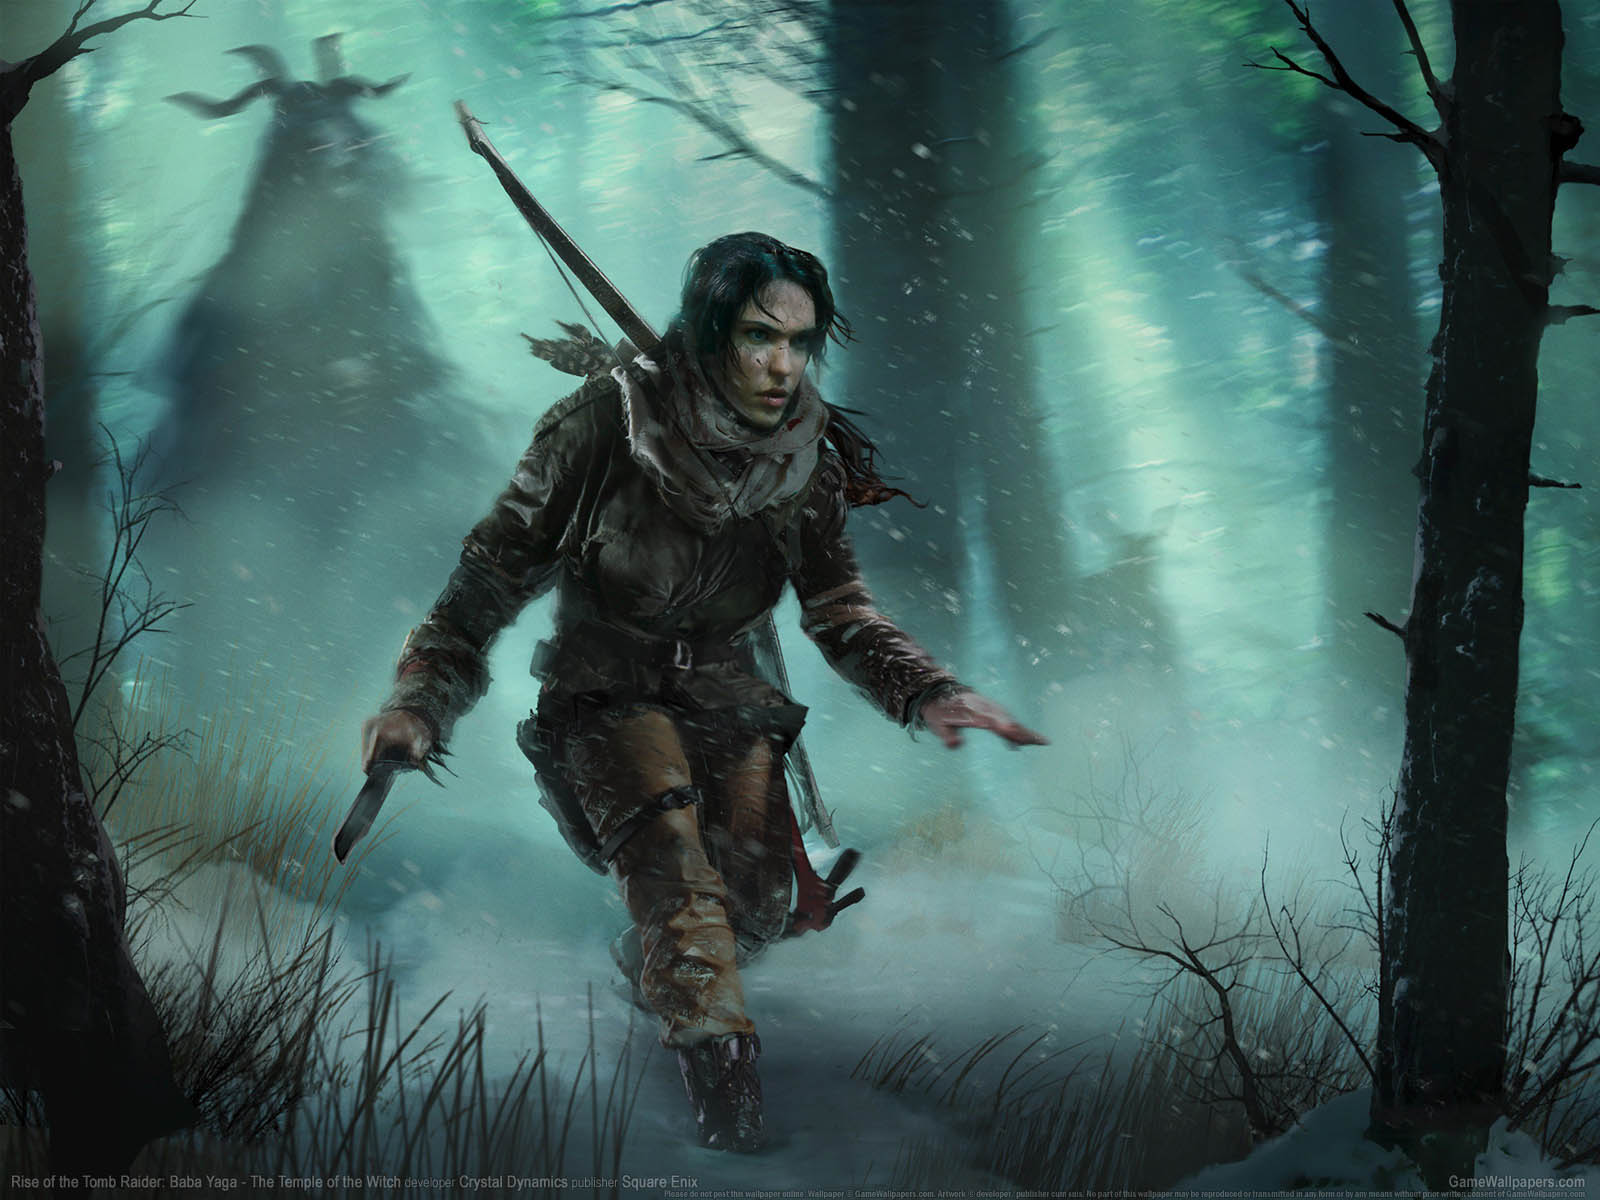 Rise of the Tomb Raider%252525252525253A Baba Yaga - The Temple of the Witch wallpaper 01 1600x1200